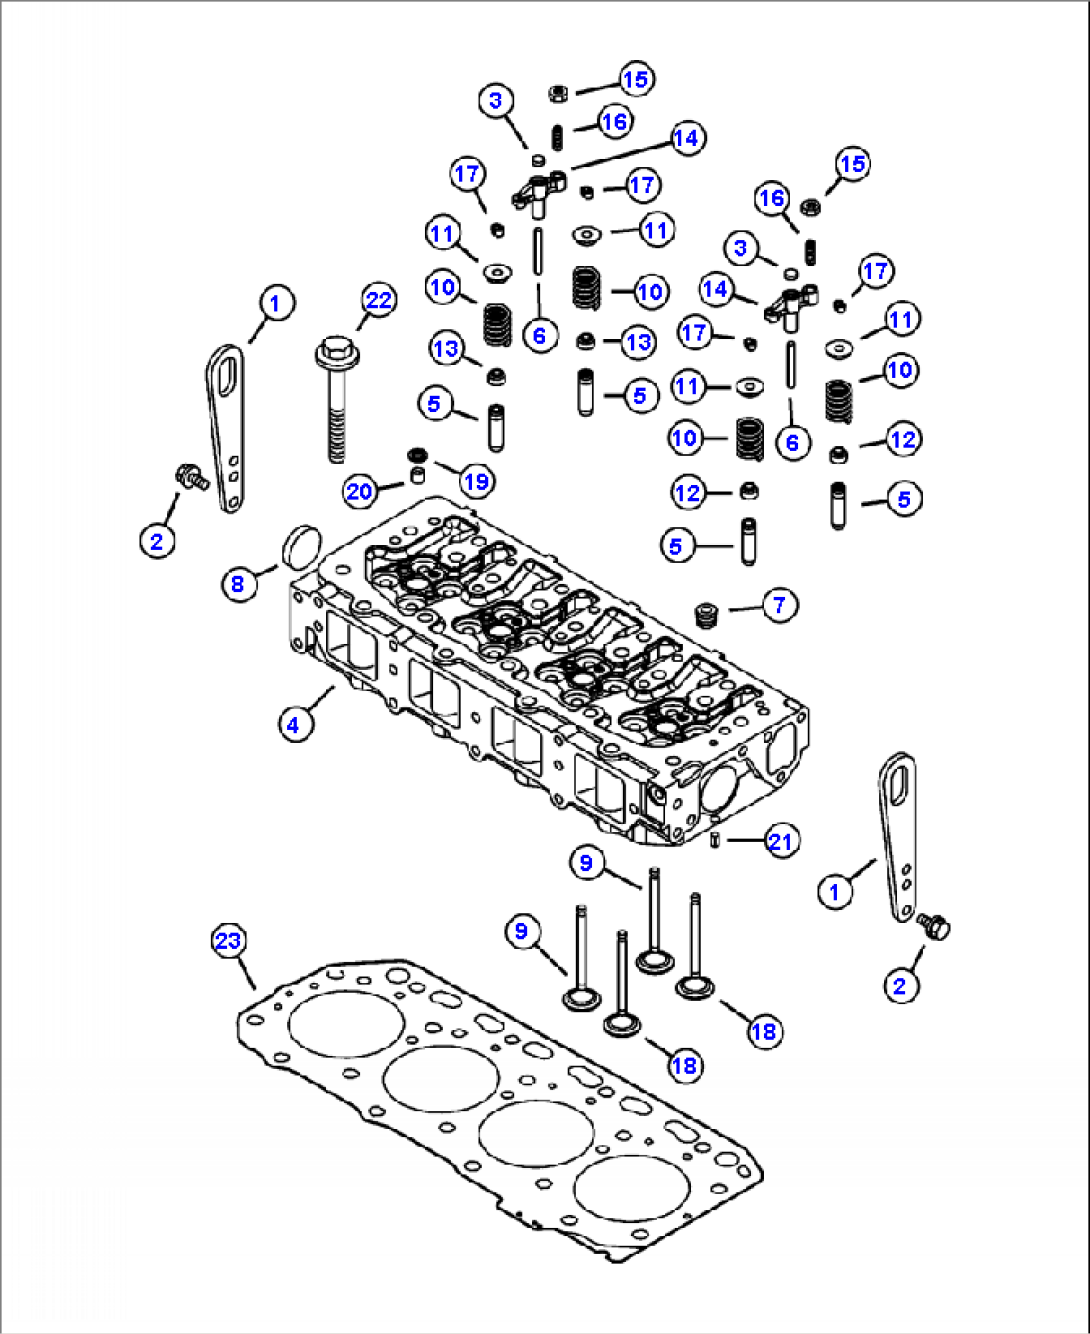 A0010-0100 CYLINDER HEAD AND VALVES